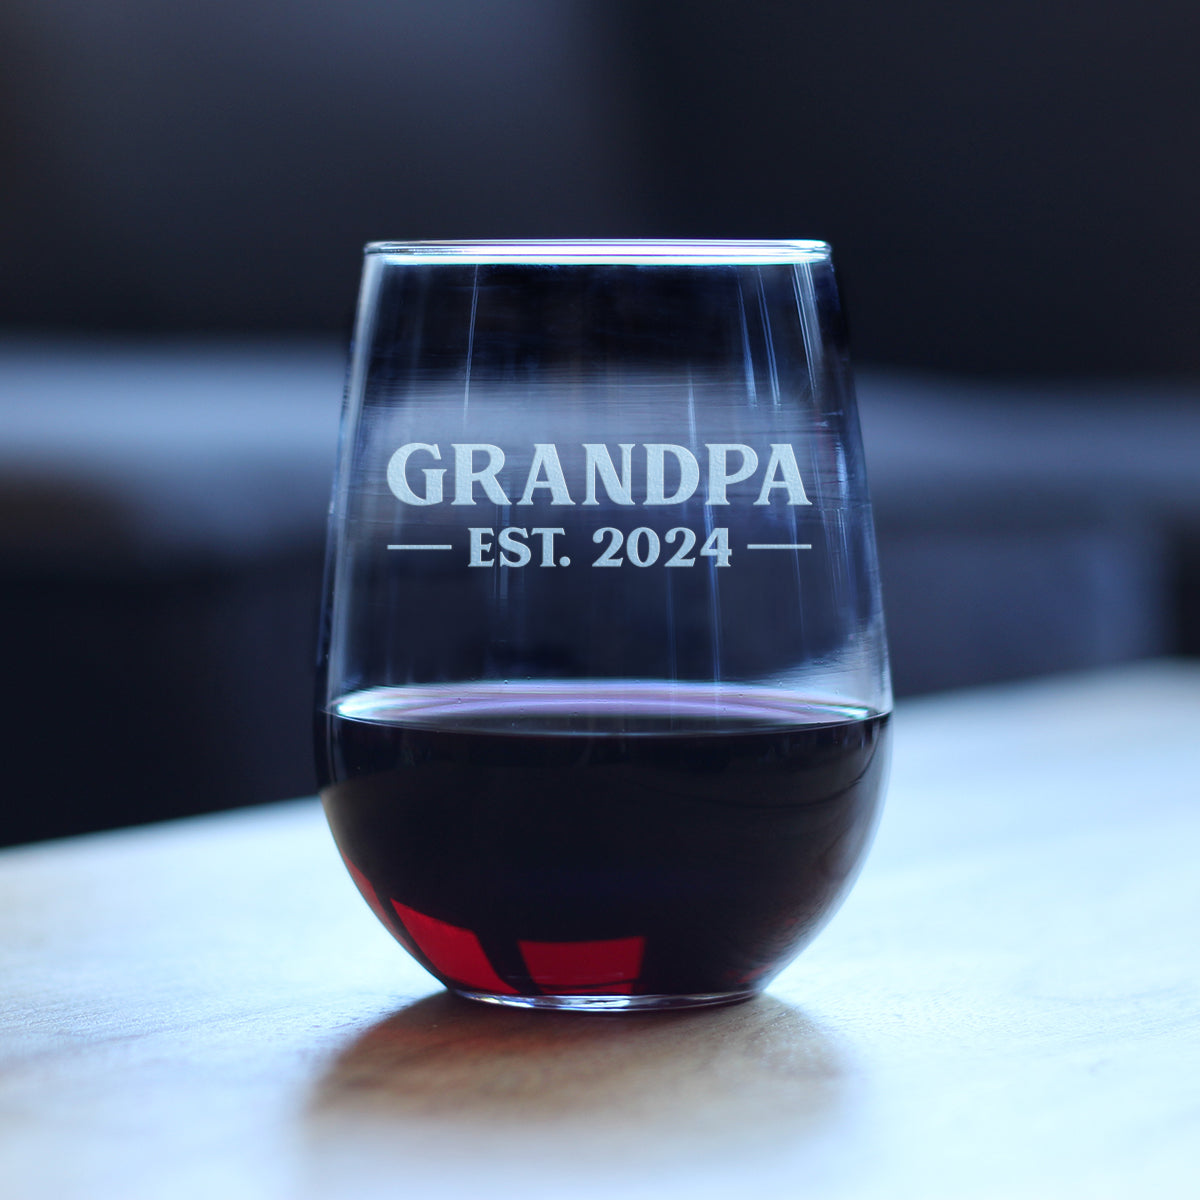 Grandpa Est 2024 - New Grandfather Stemless Wine Glass Gift for First Time Grandparents - Bold 17 Oz Large Glasses